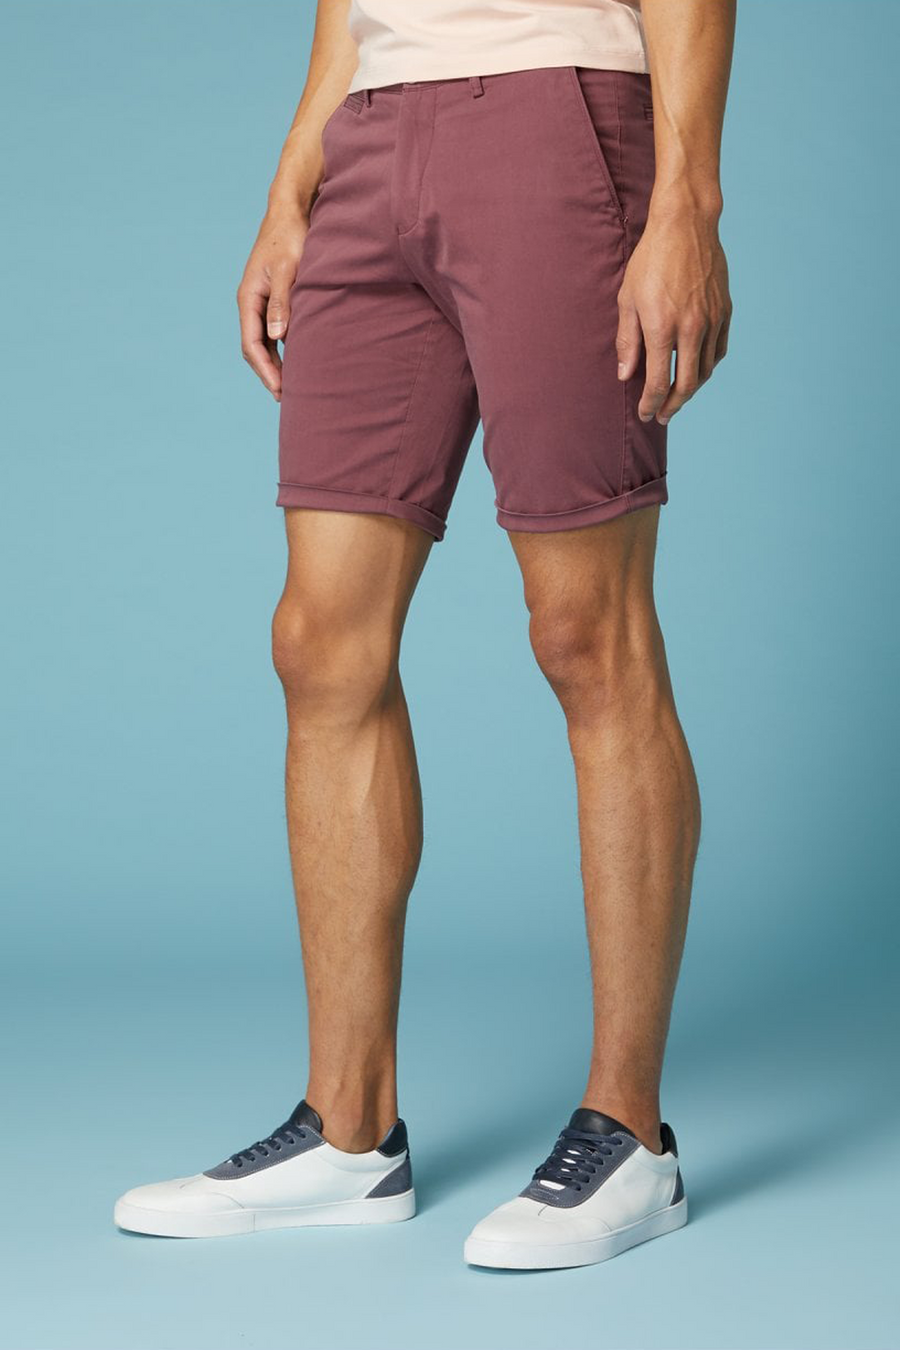 Buy the Remus Uomo Chino Shorts Burgundy at Intro. Spend £50 for free UK delivery. Official stockists. We ship worldwide.